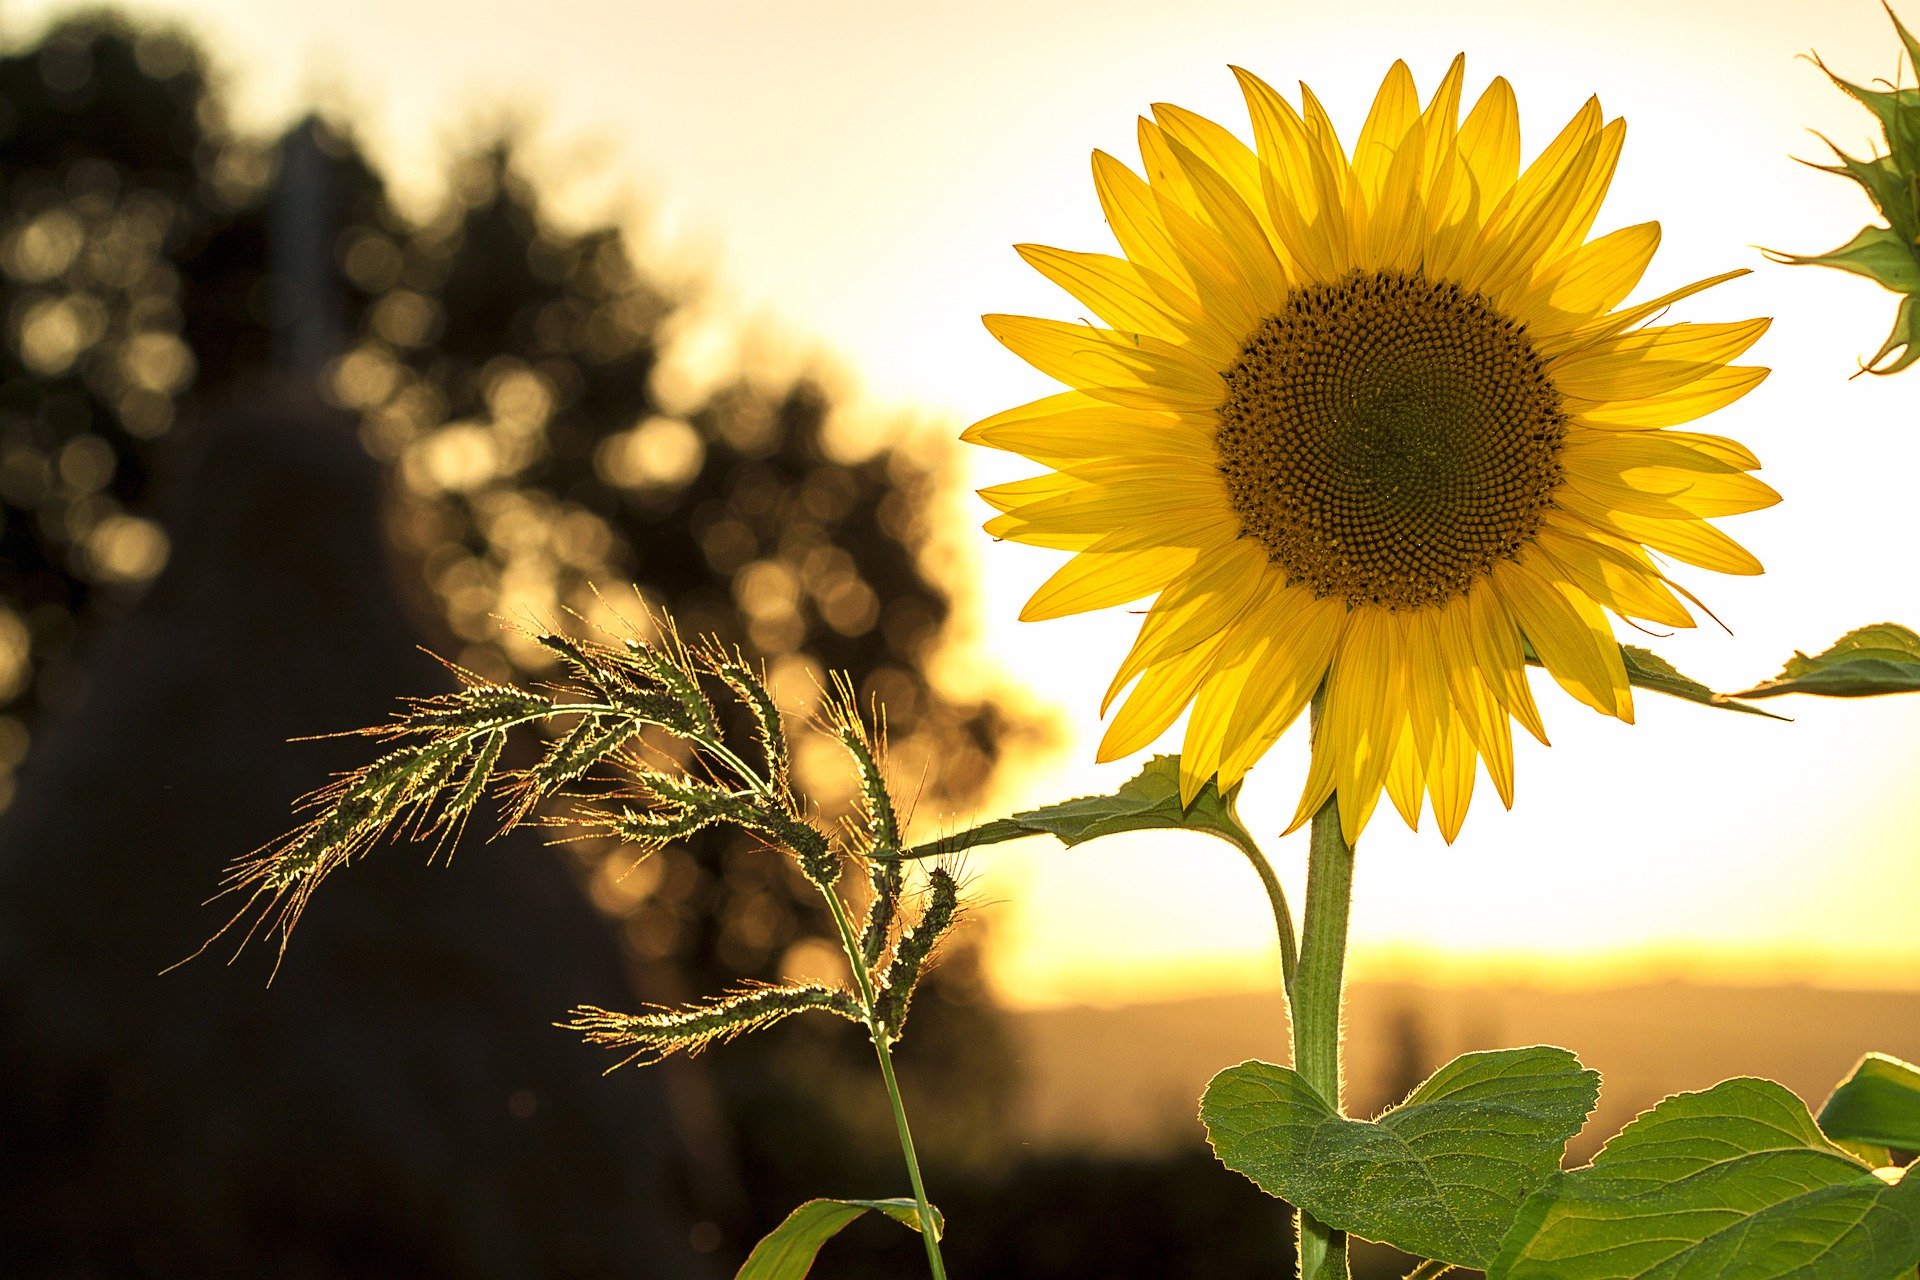 A sunflower at Summer Solstice, standing in Bright Sunshine